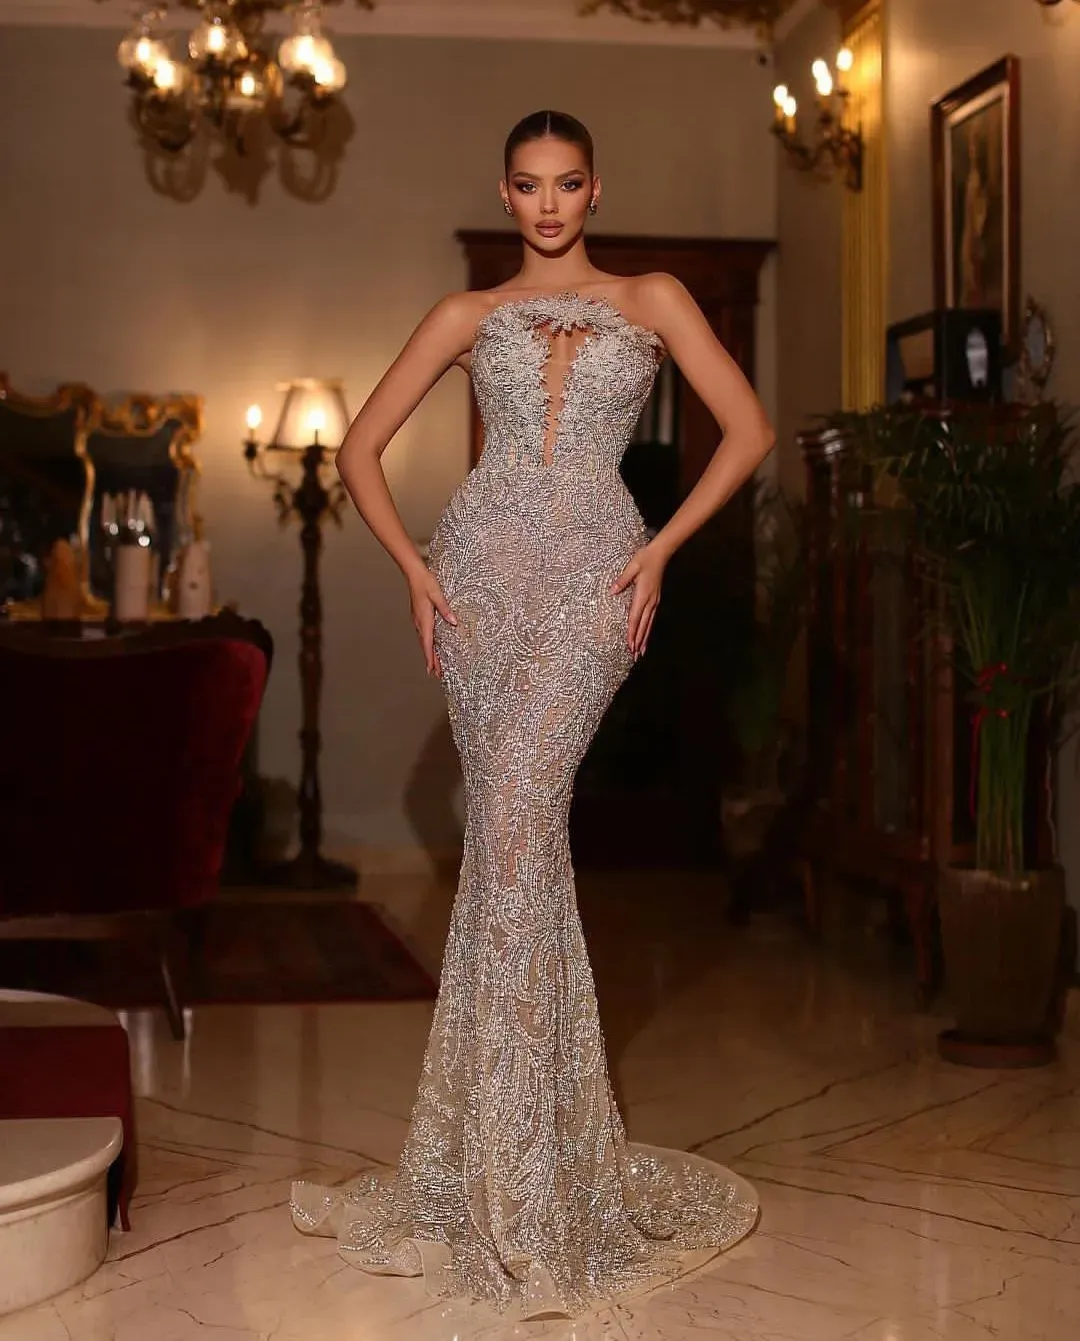 Luxury Mermaid Evening Dresses Sleeveless V Neck Beaded Exquisite Appliques Sequins Floor Length Celebrity 3D Lace Hollow Formal Prom Dresses Gowns Party Dress